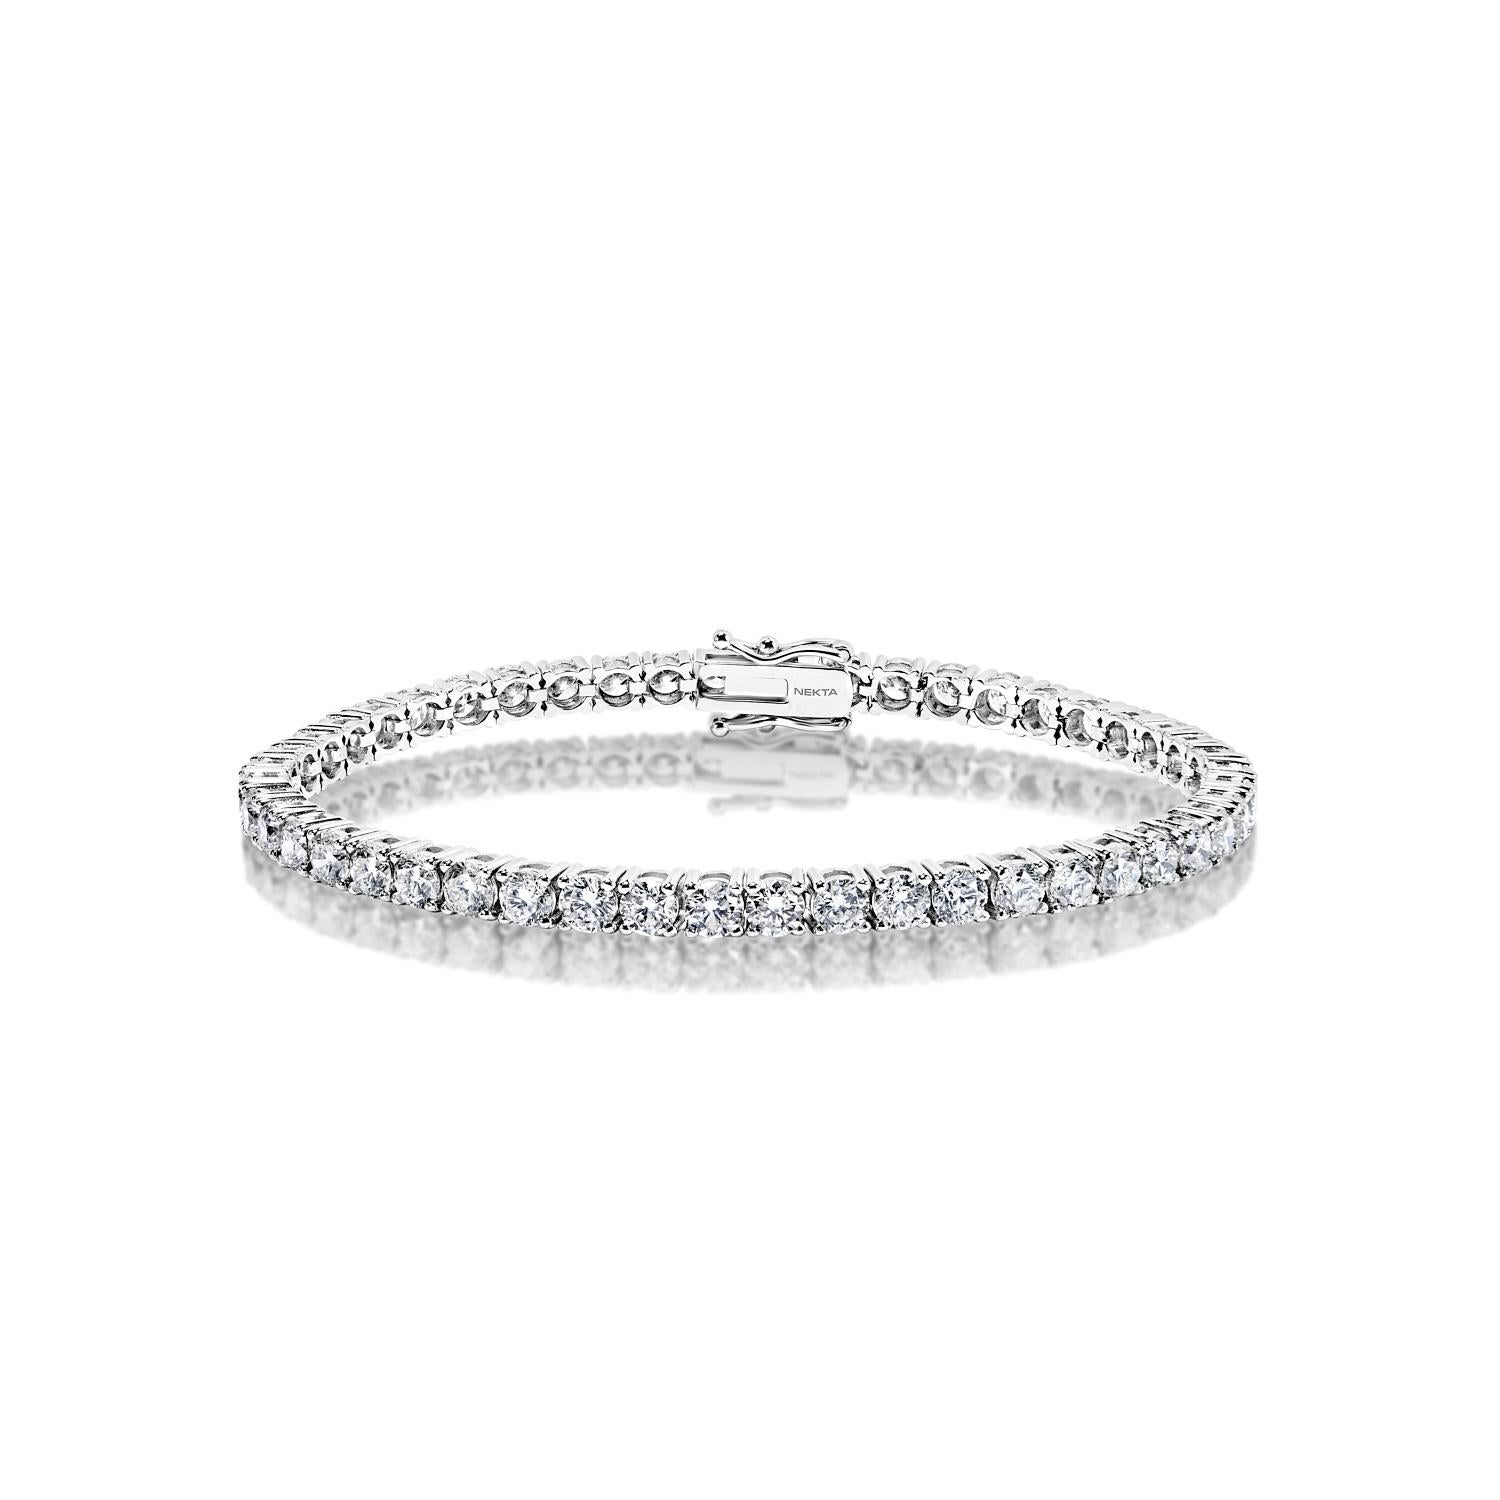 The ZURI 9 Carats Diamond Tennis Bracelet 19 pointer each stone features ROUND CUT DIAMONDS brilliants weighing a total of approximately 9.02 carats, set in 14K White Gold.

Style:
Diamonds
Diamond Size: 9.02 Carats
Diamond pointer: 19 Pointers each